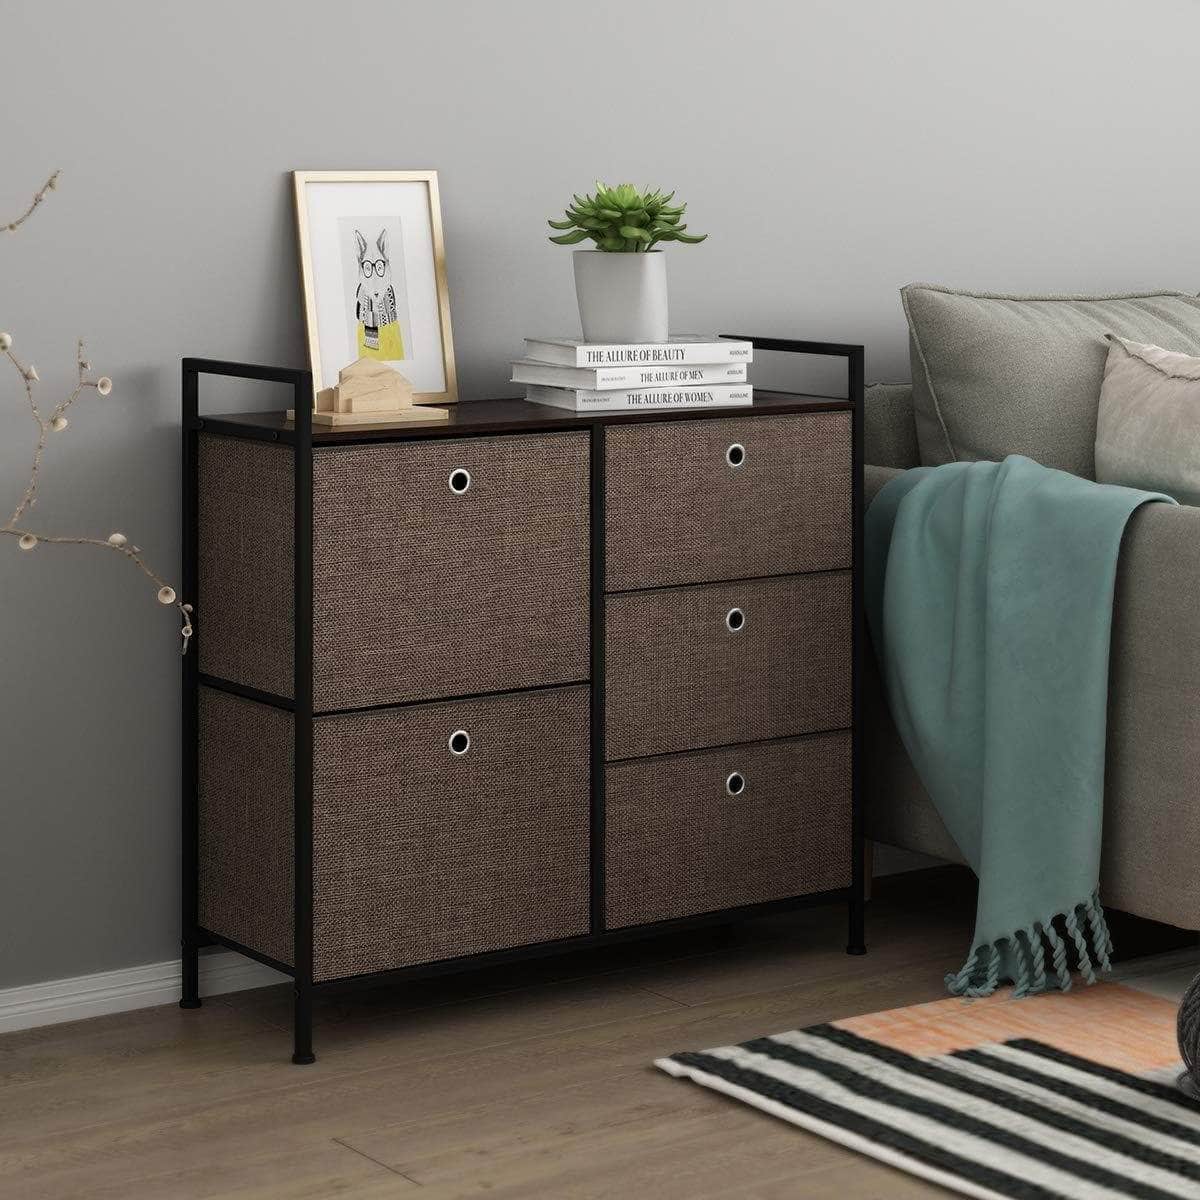 Products langria faux linen wide dresser storage tower with 5 easy pull drawer and handles sturdy metal frame and wooden table organizer unit for guest dorm room closet hallway office area dark brown